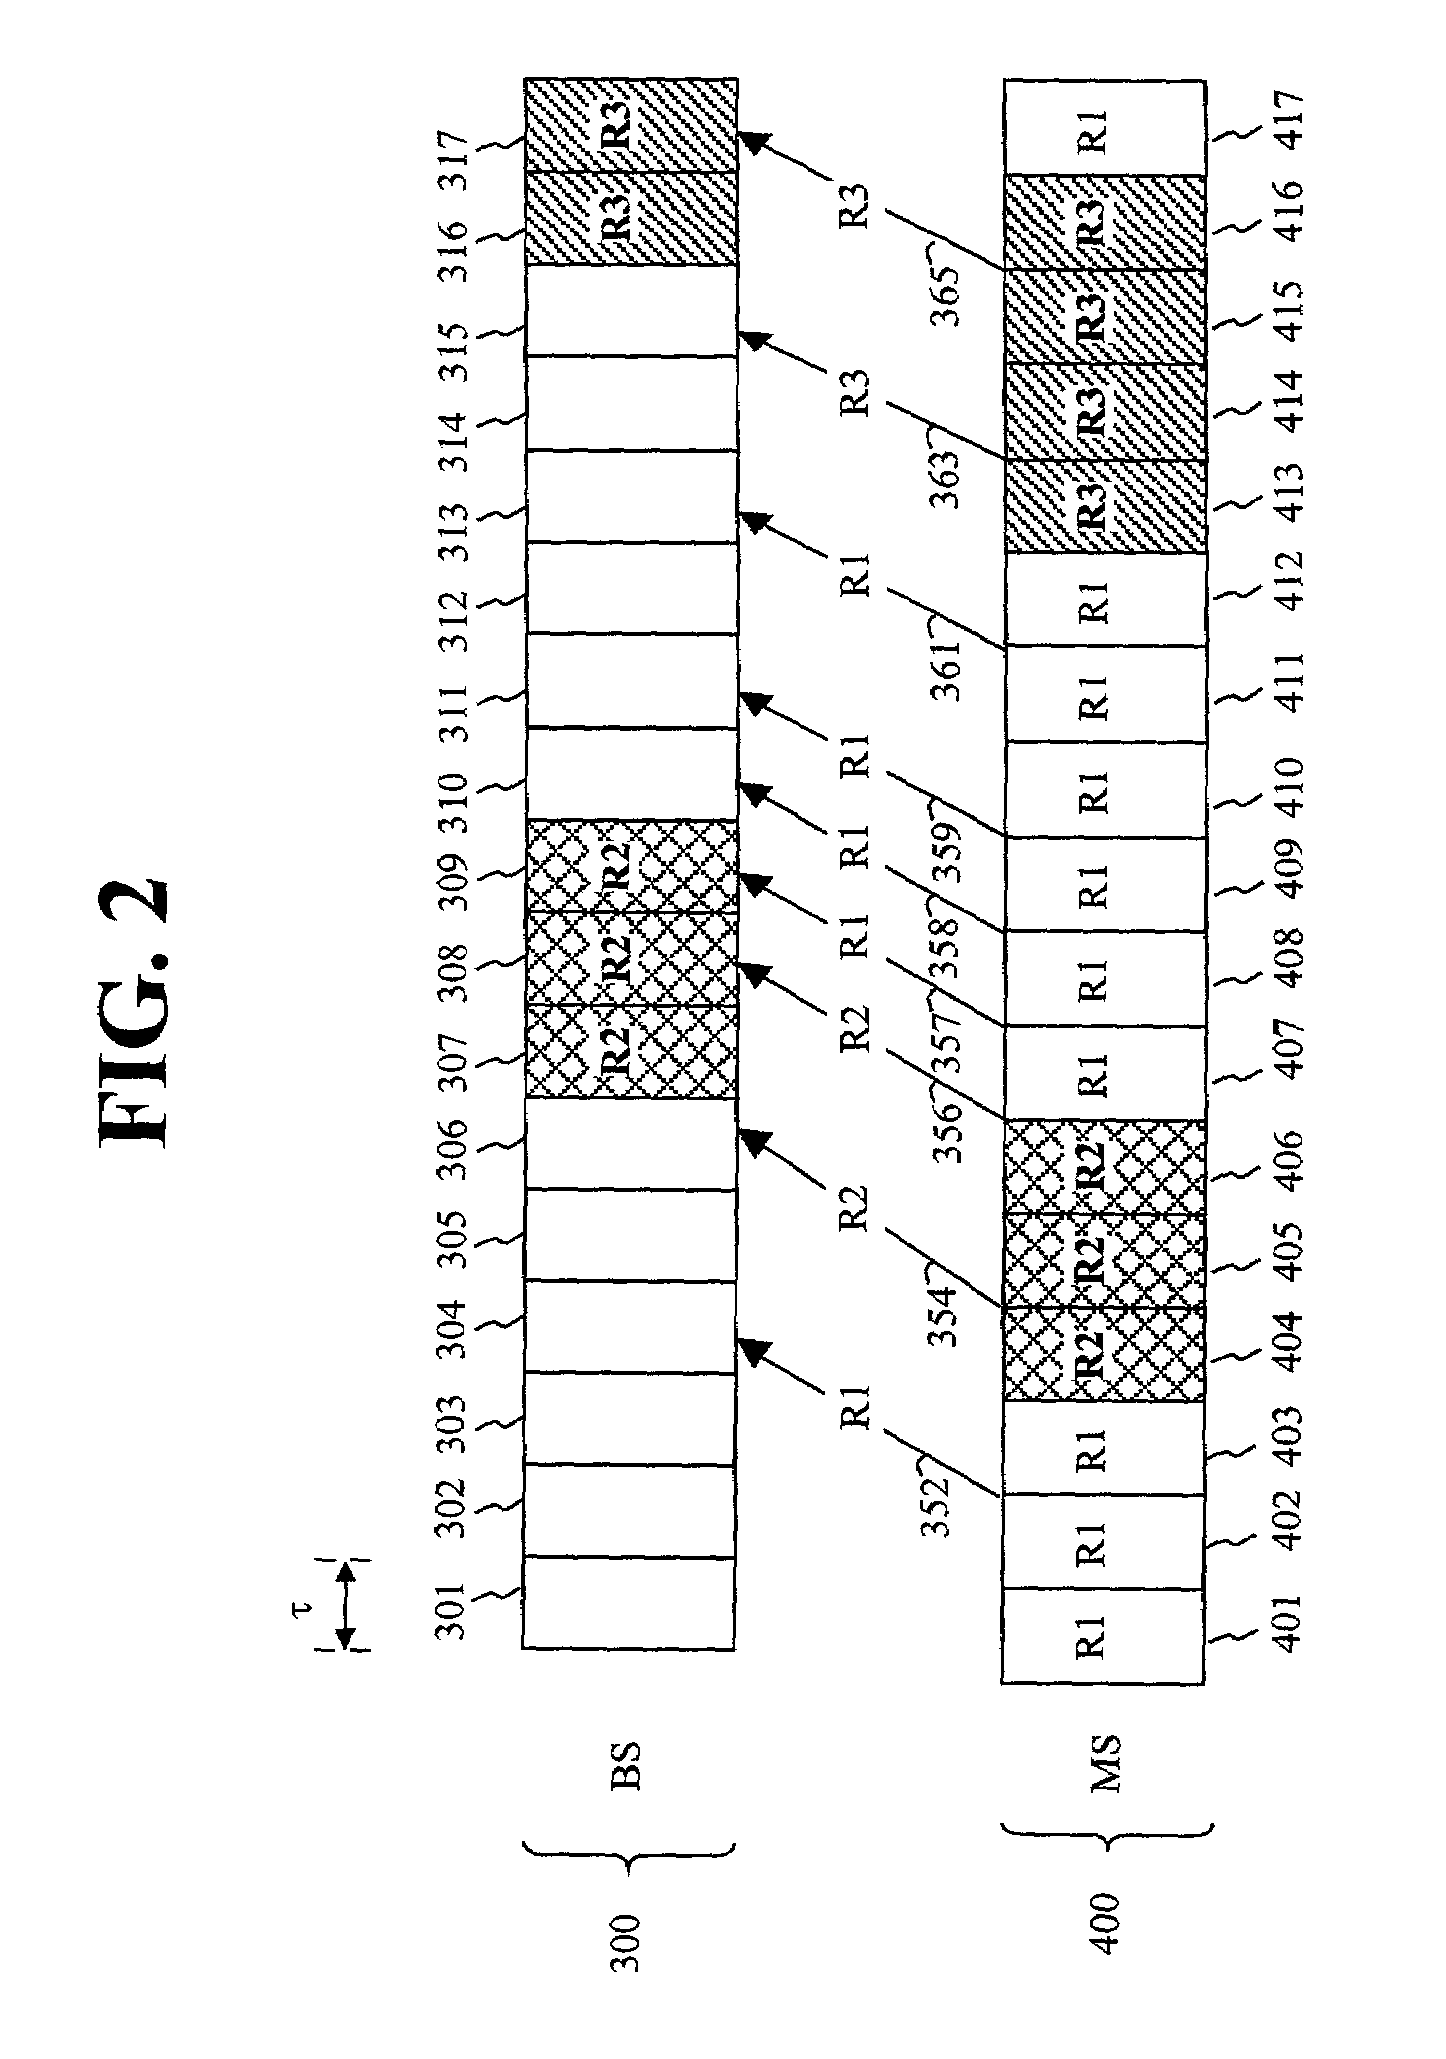 Variable rate channel quality feedback in a wireless communication system